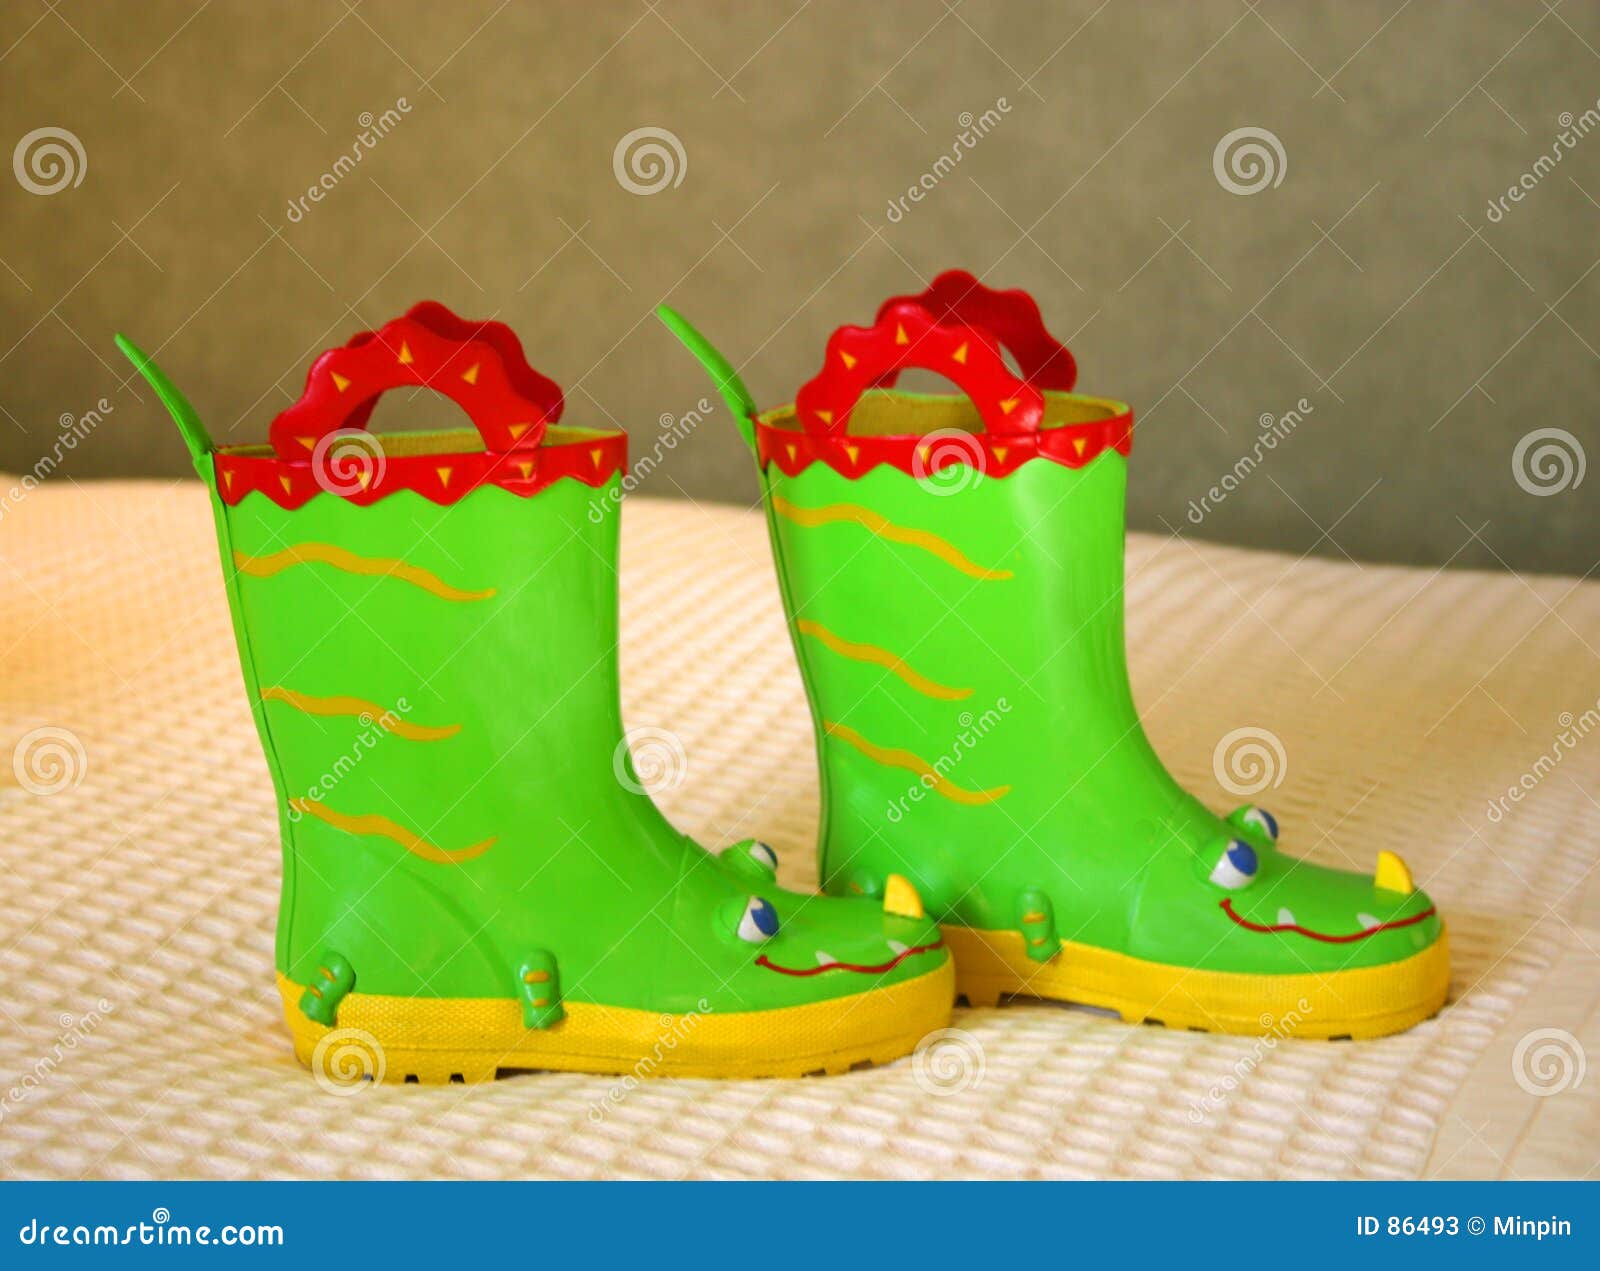 Appeal to be attractive Funnel web spider rag Little girl s boots stock image. Image of green, rain, funny - 86493